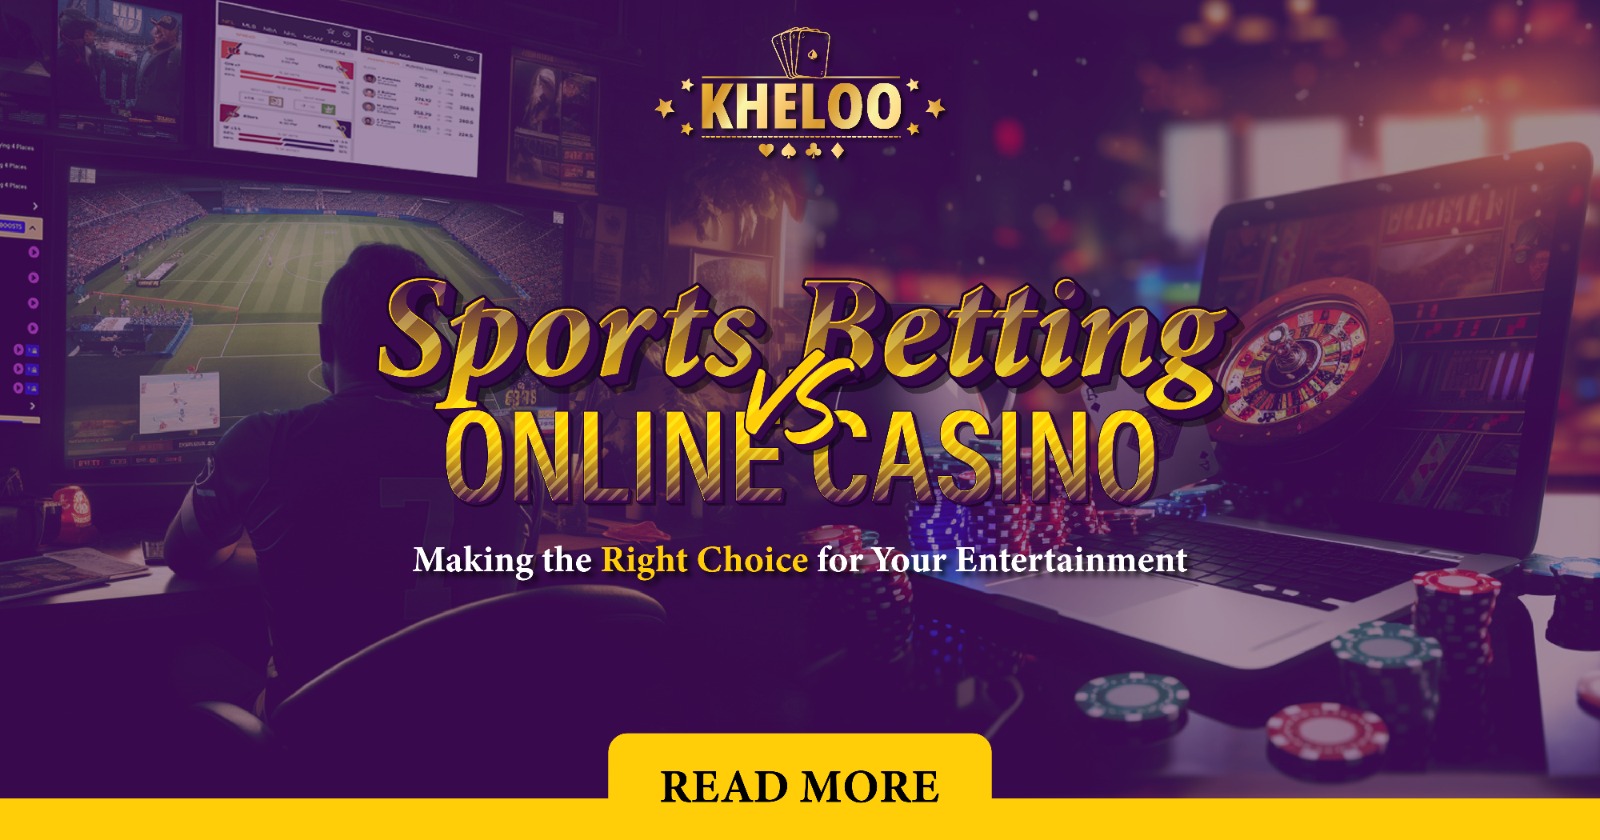 Ho To The Psychology Behind Free Casino Games in India Without Leaving Your House